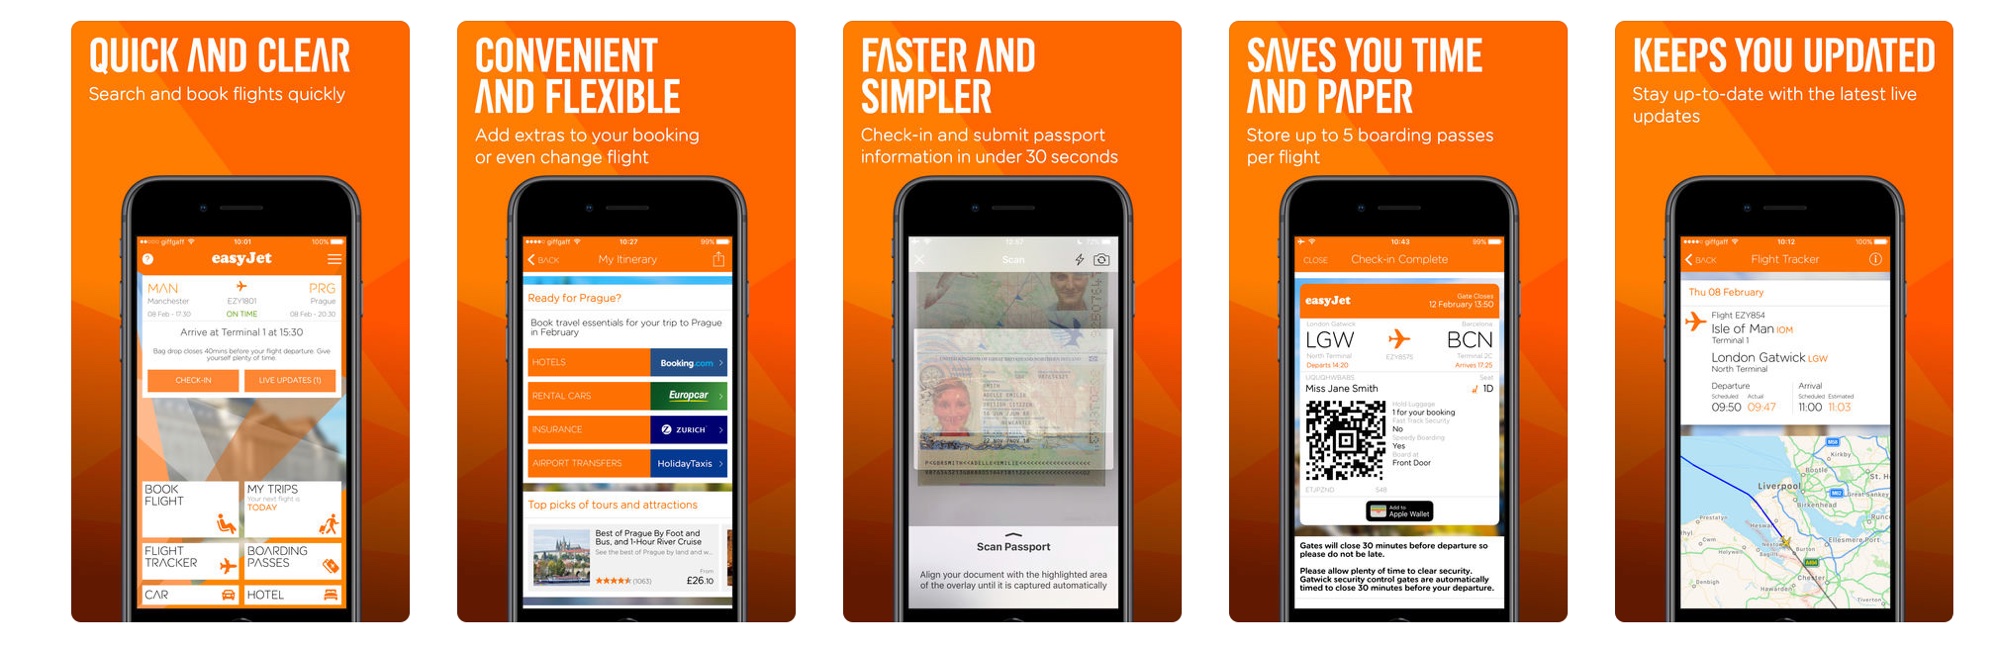 easyJet’s app is tight as its plane’s legroom.